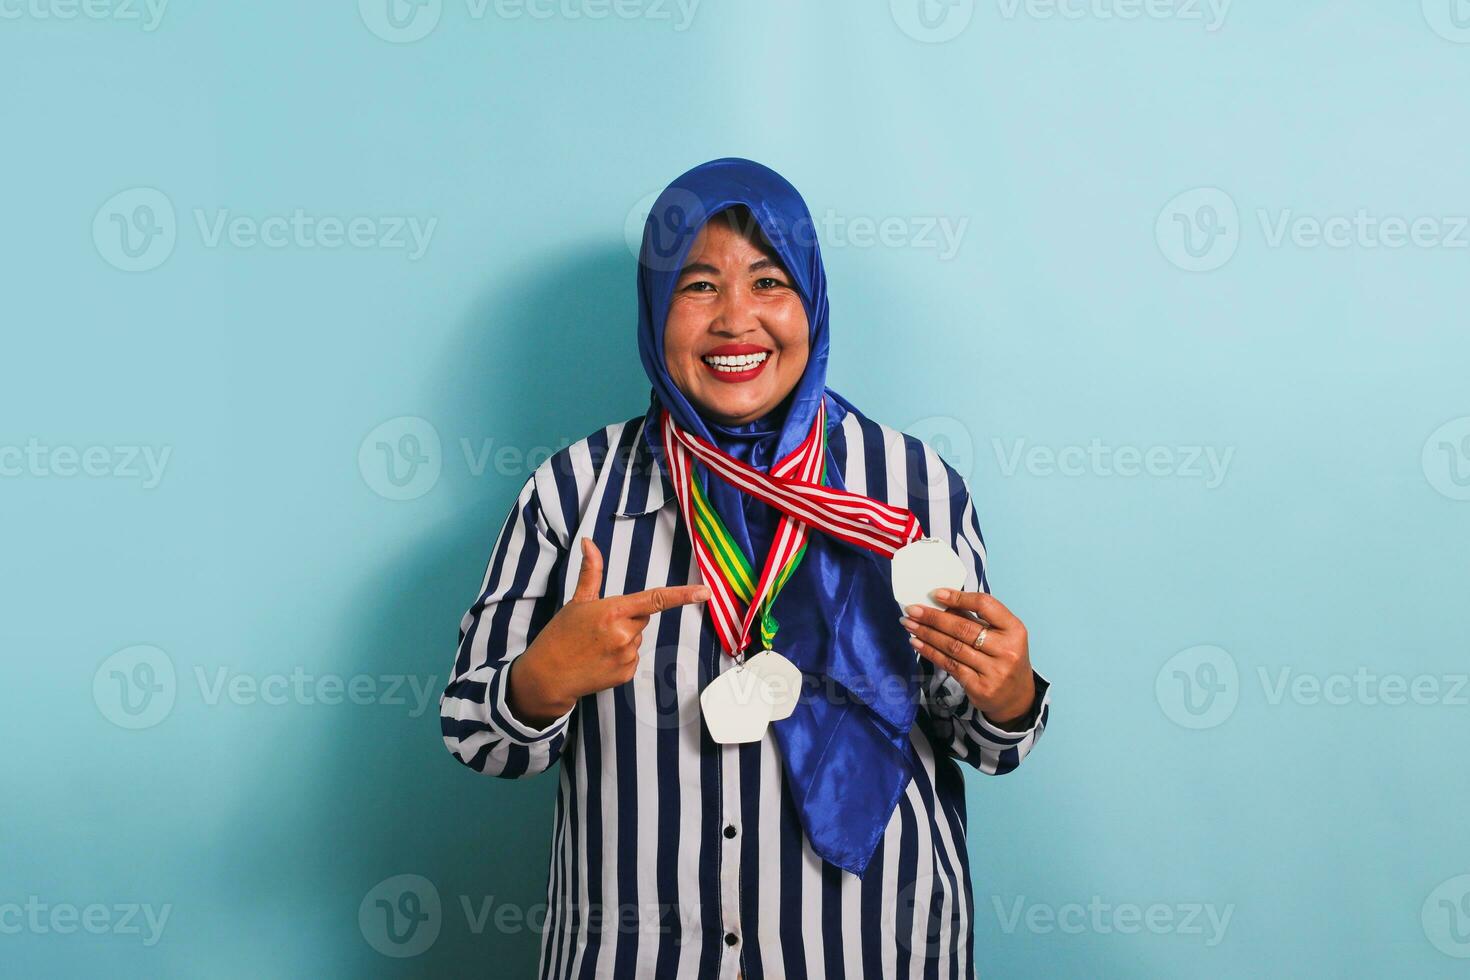 An excited middle-aged Asian woman, wearing a blue hijab and a striped shirt, is proudly pointing to the medal she is holding, isolated on blue background. photo